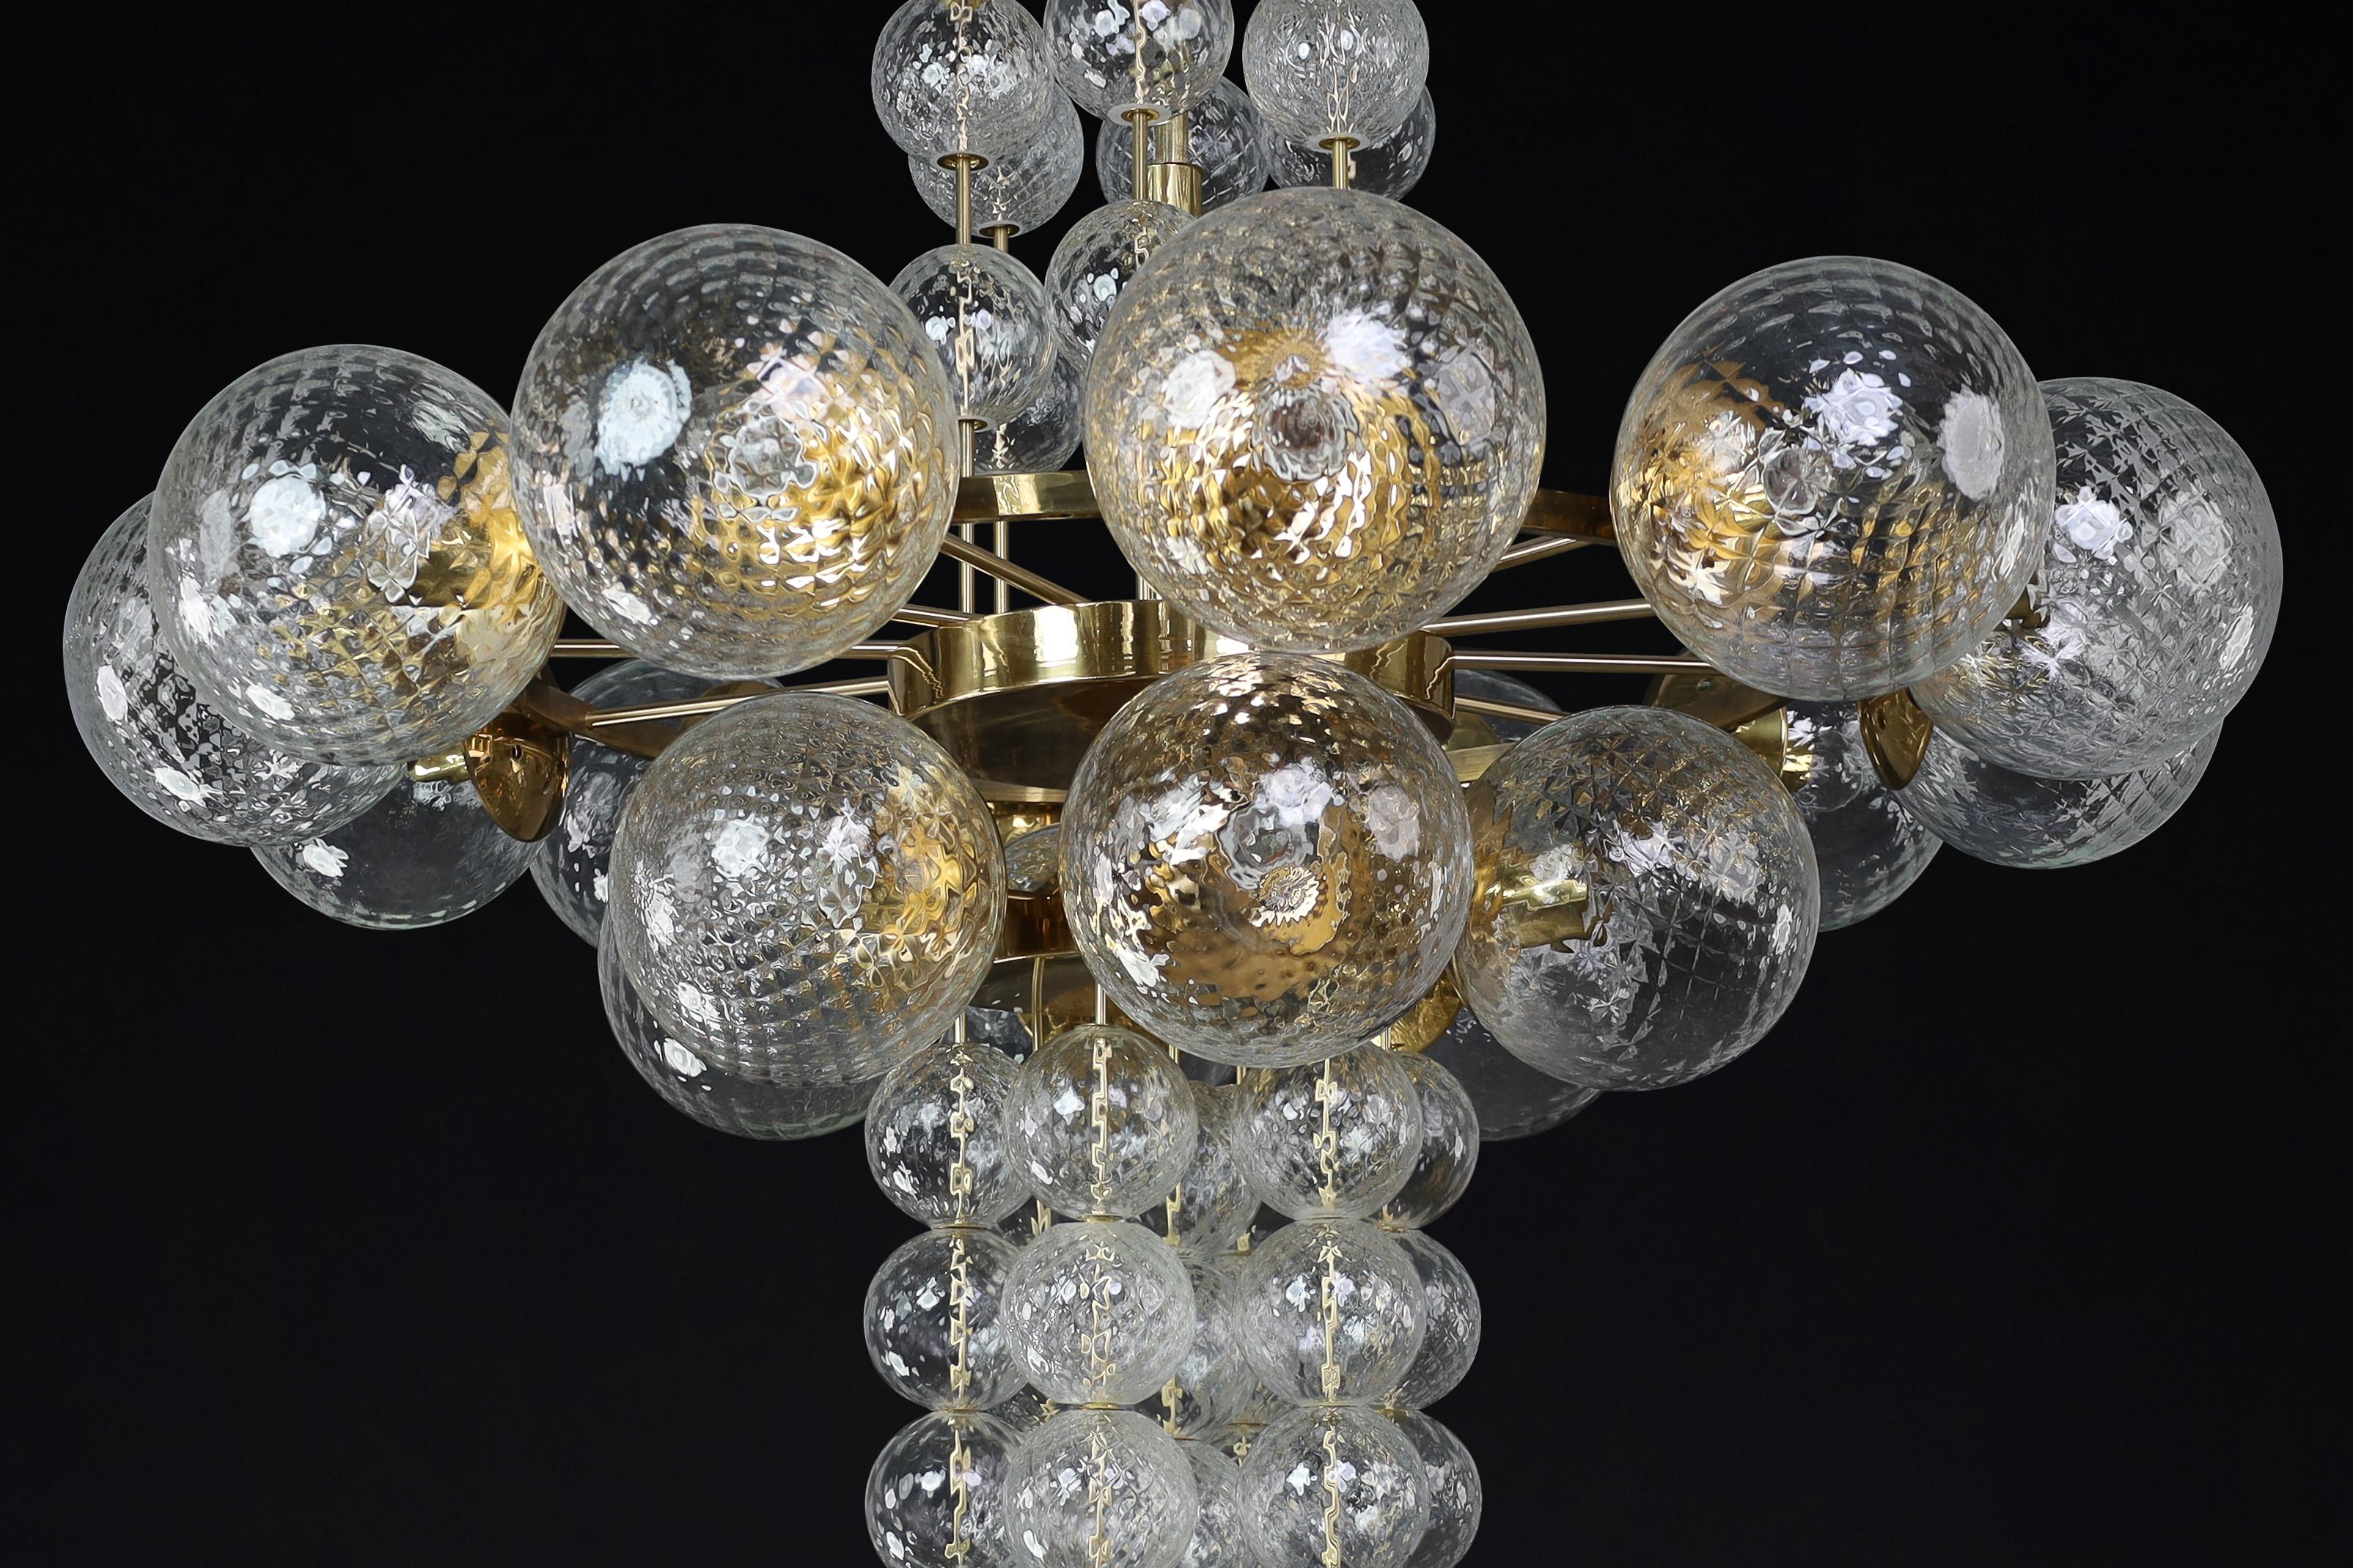 Large Chandelier with brass fixture and hand-blowed glass globes by Preciosa Cz. For Sale 13